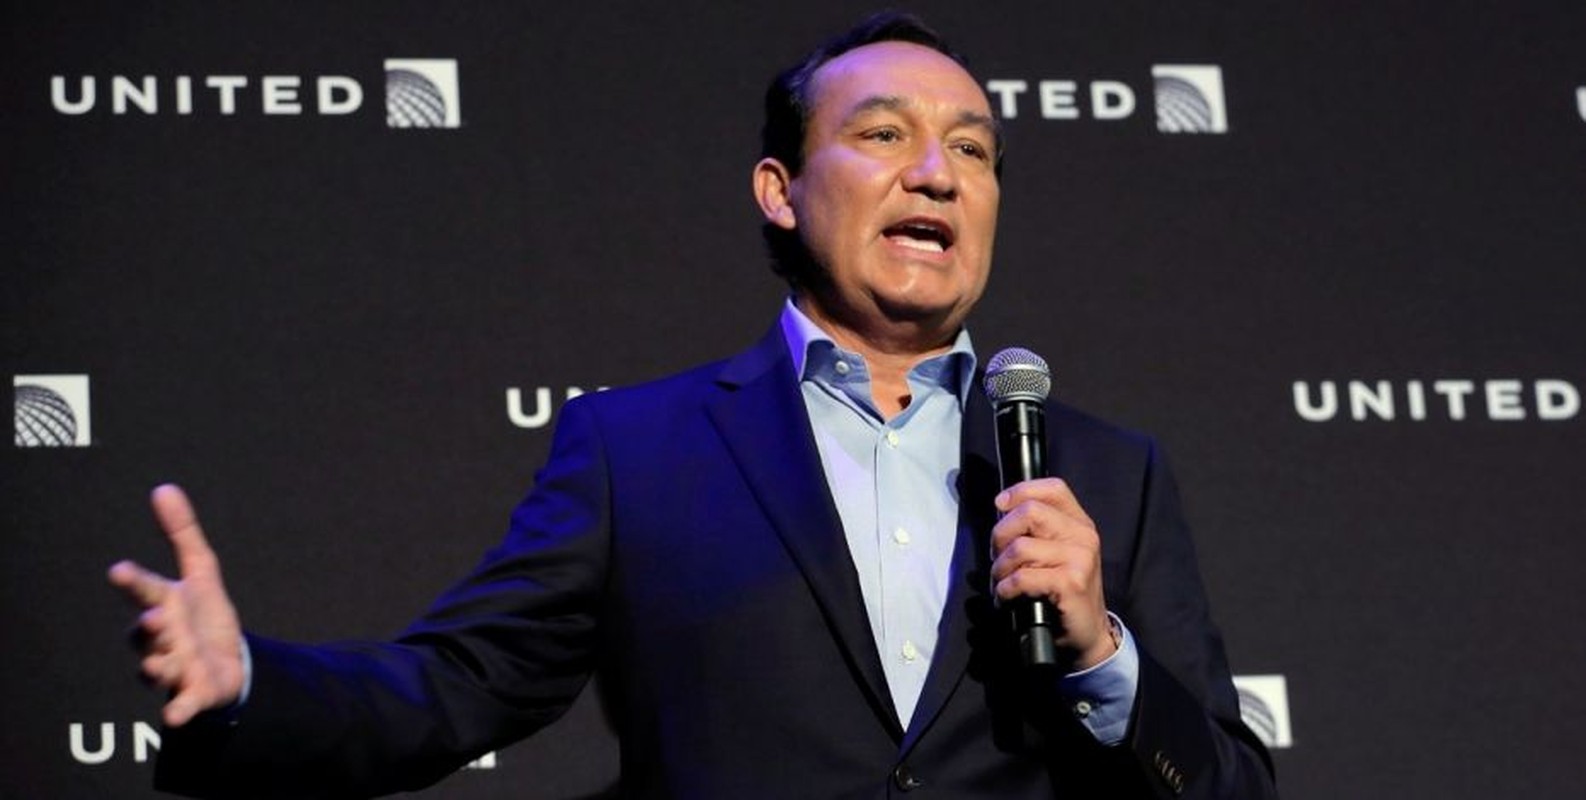 CEO United Airlines nguy co “thung tui” vi scandal keo le khach-Hinh-6